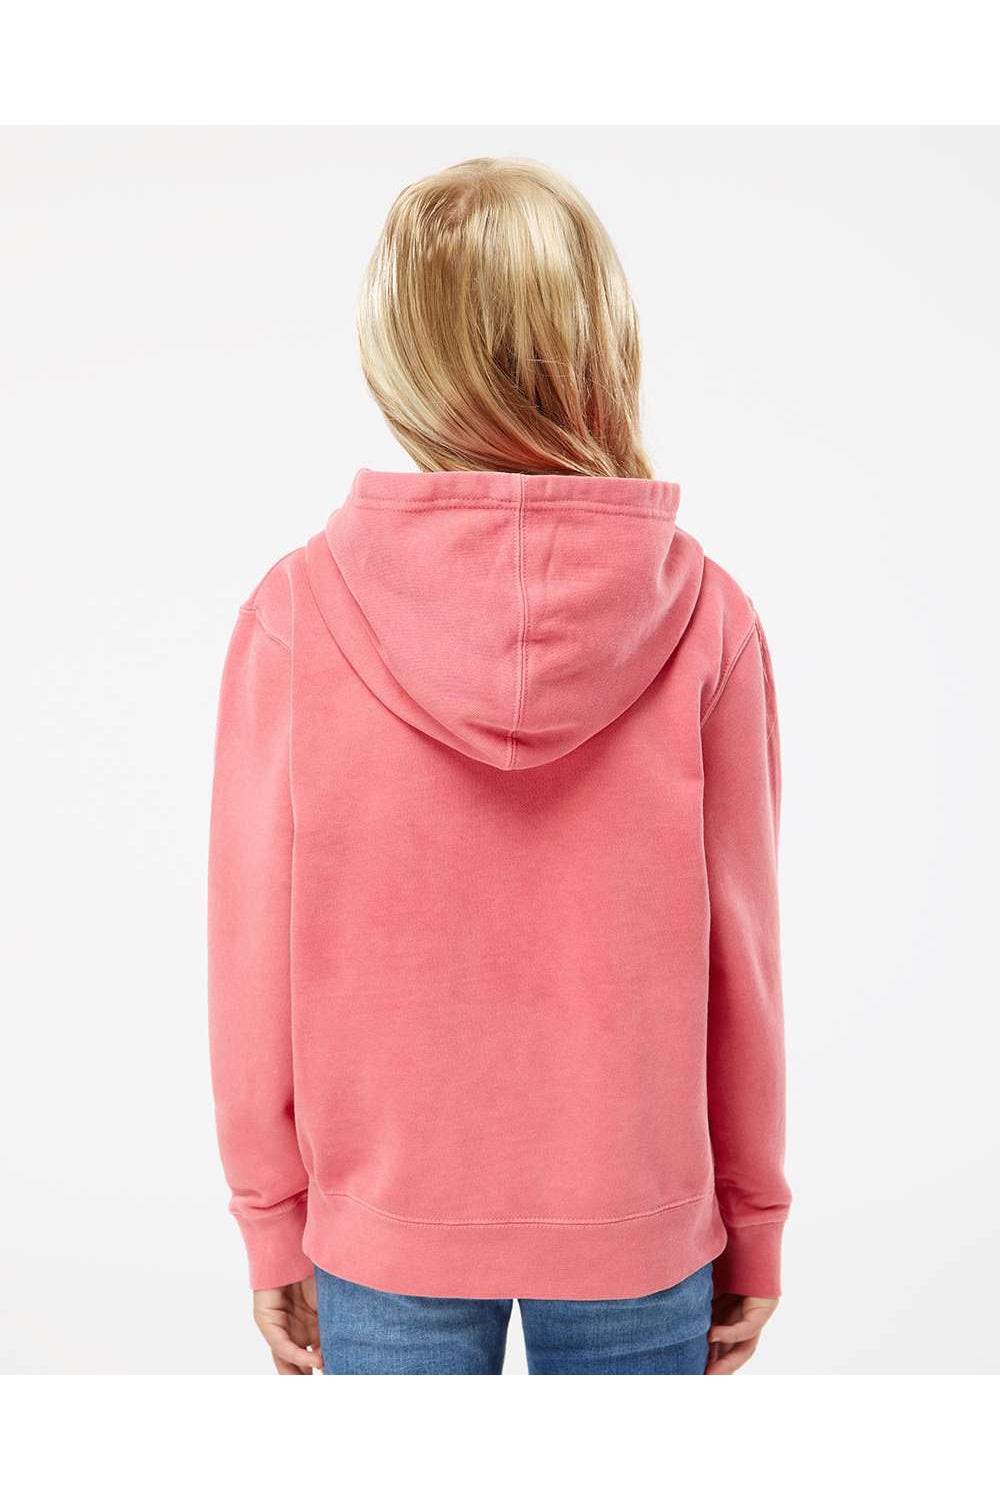 Independent Trading Co. PRM1500Y Youth Pigment Dyed Hooded Sweatshirt Hoodie Pink Model Back